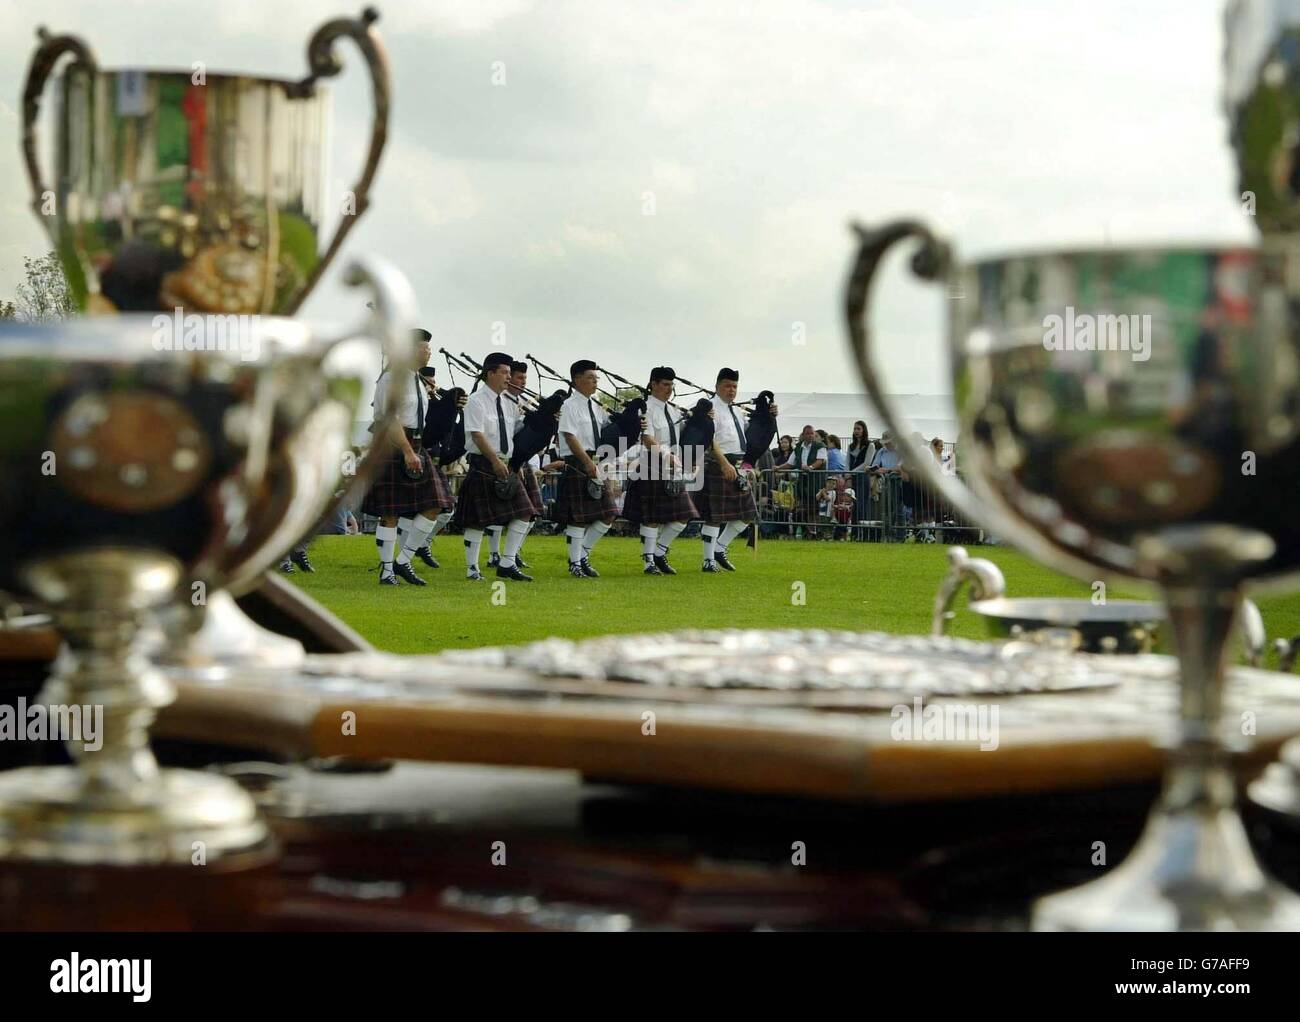 A Canadian pipeband being judged with a selection of trouphies laid out for the winners during the world Pipe Band Championship, Glasgow Green, Scotland. Stock Photo